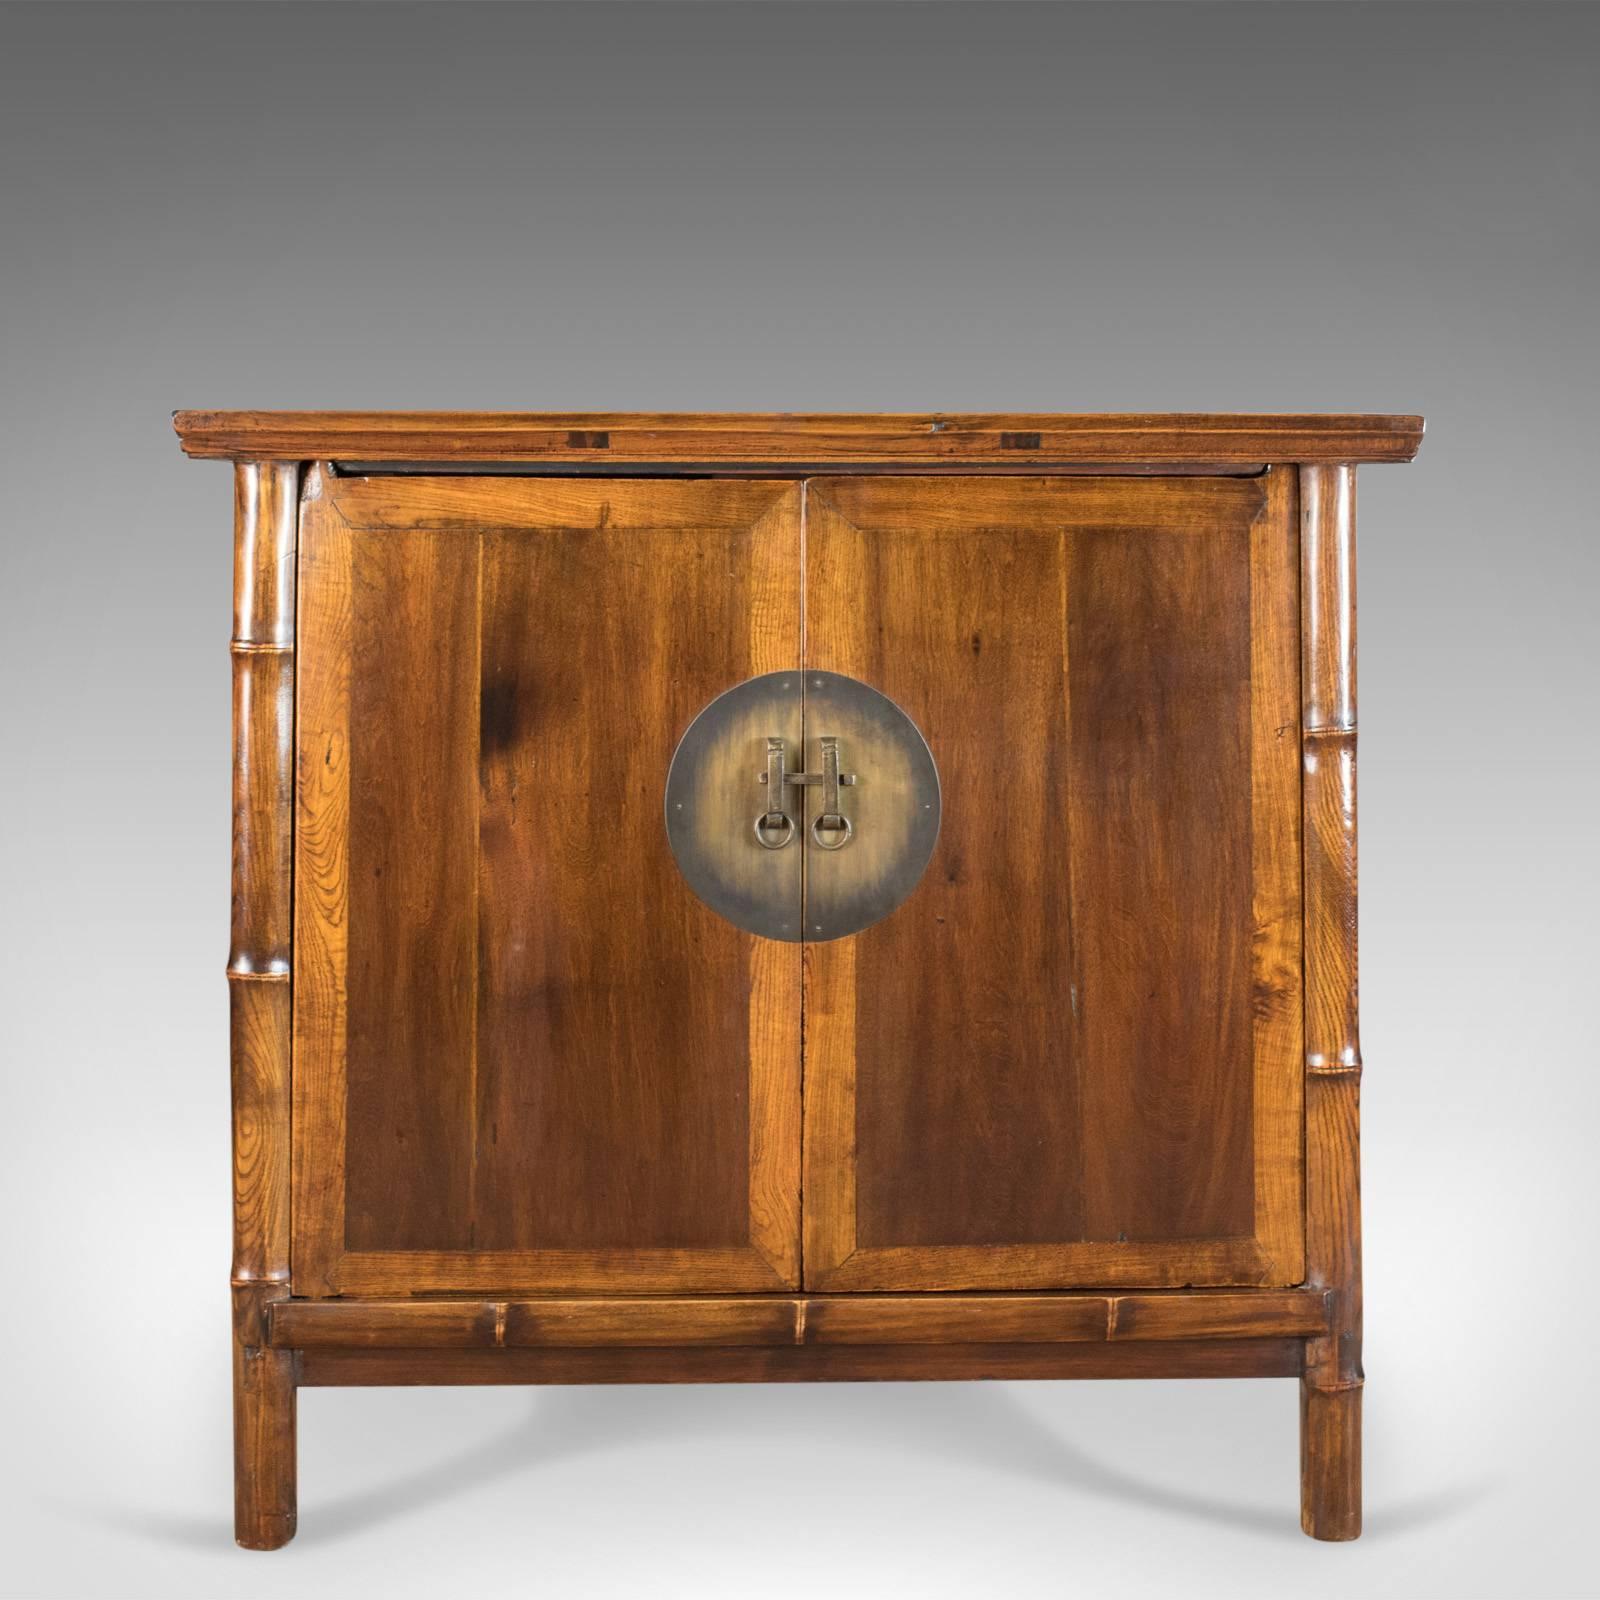 This is a large elm cabinet in the oriental taste, a late 20th century Chinese cupboard.

Mellow caramel hues in a subtle two tone design
Attractive grain interest in the wax polished finish
Raised on circular section bamboo style legs